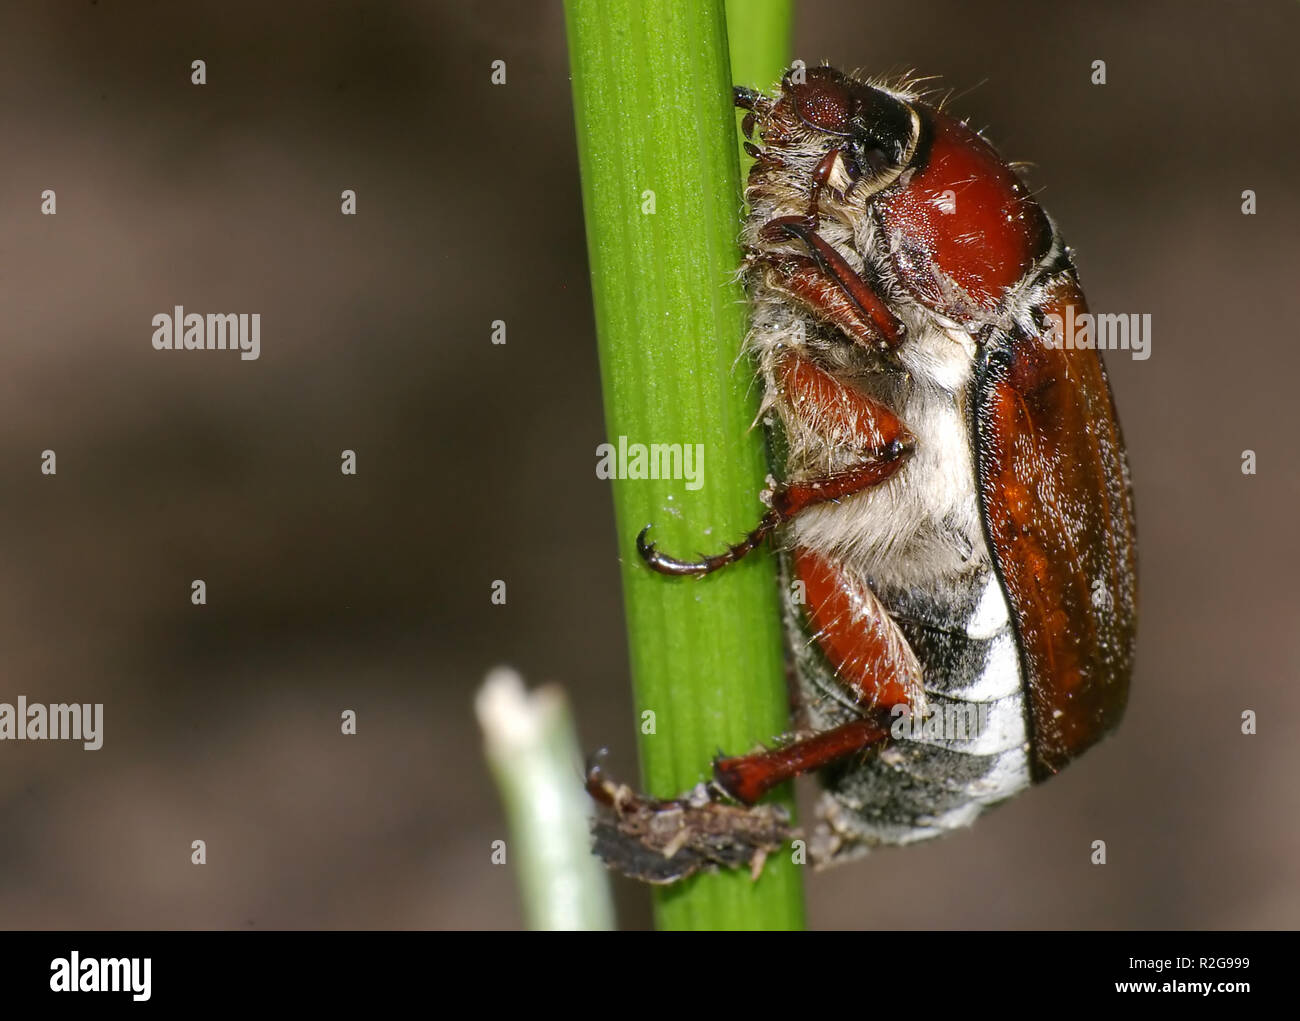 bugs in the merry month Stock Photo